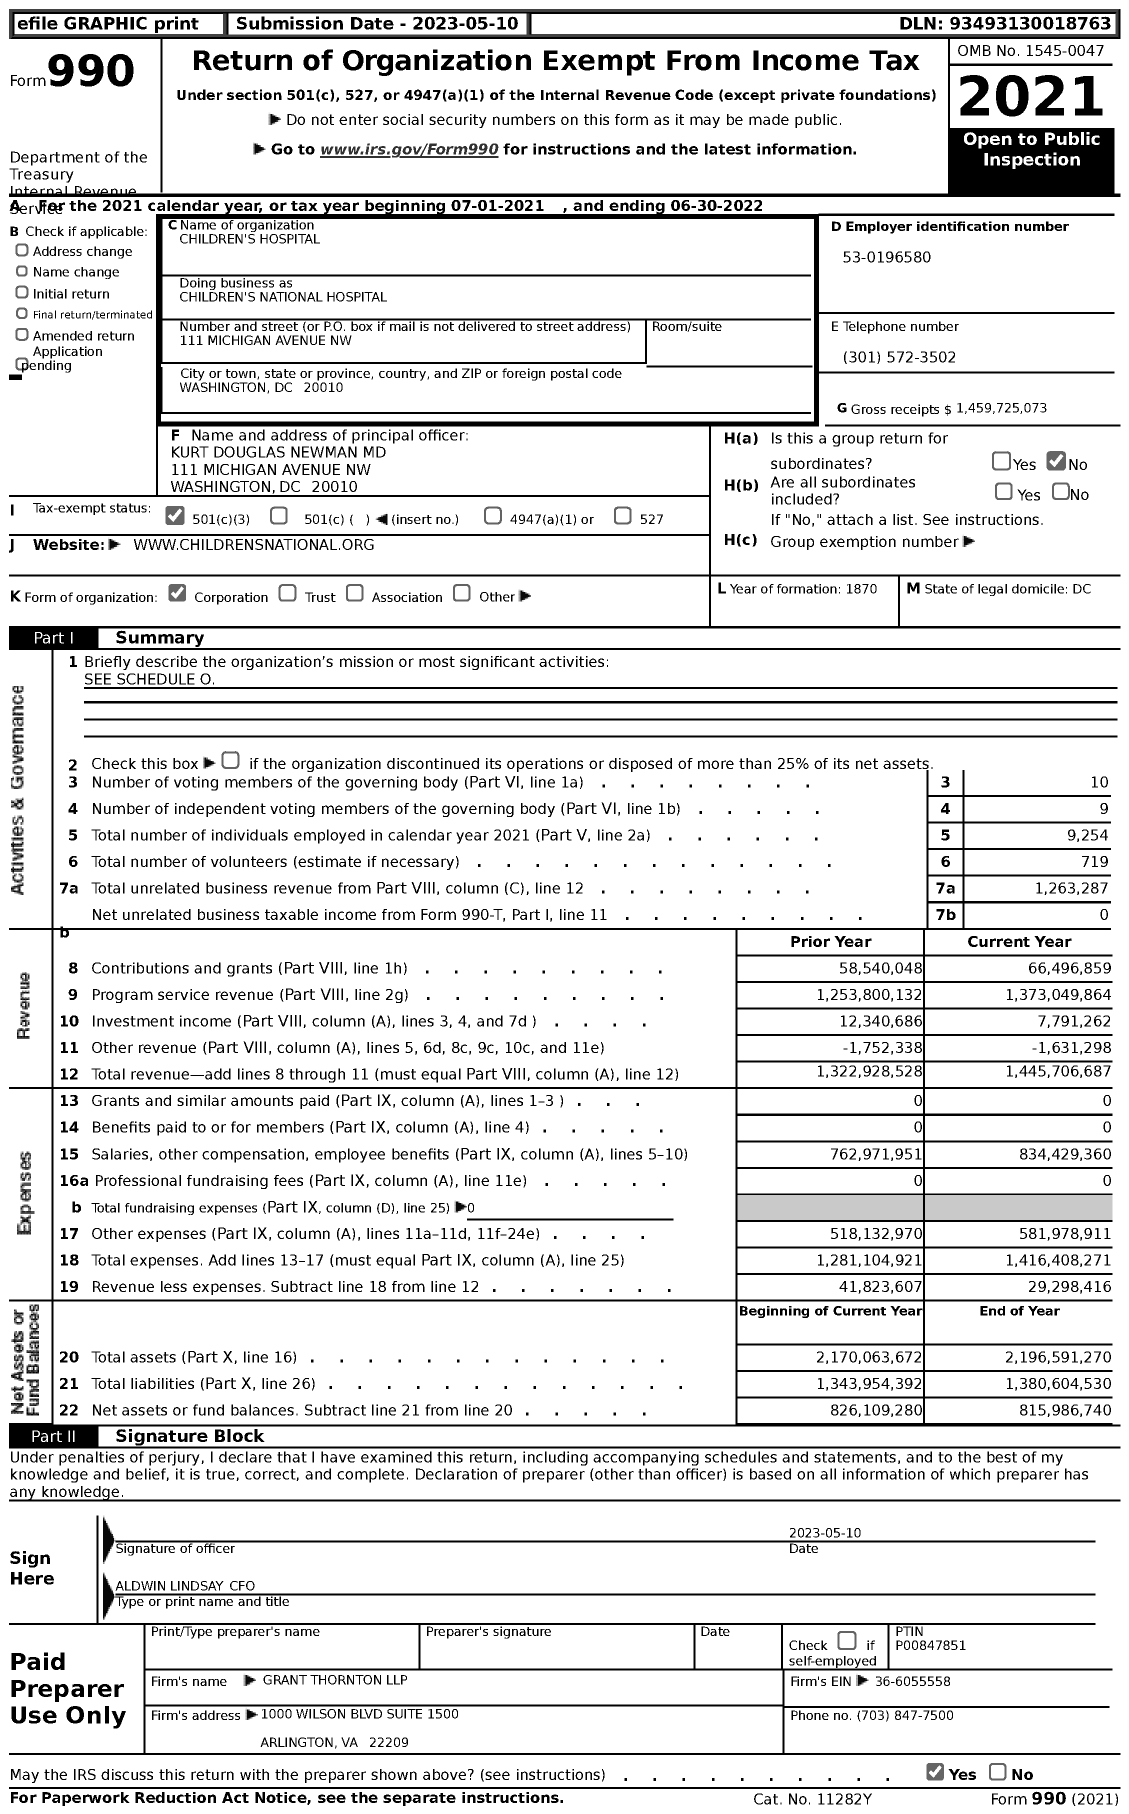 Image of first page of 2021 Form 990 for Children's National Hospital